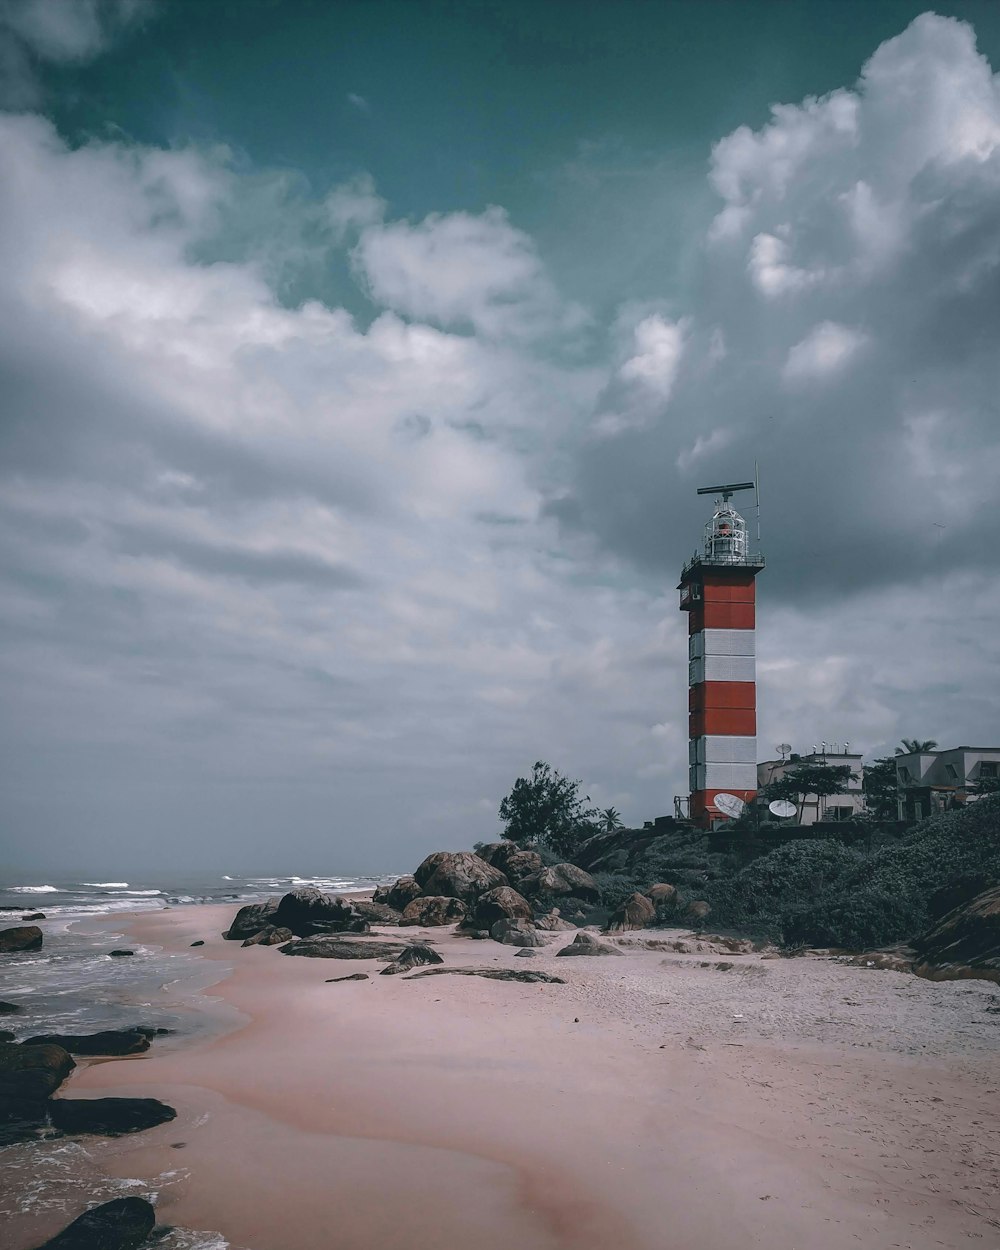 red and white lighthouse on brown sand near body of water during daytime